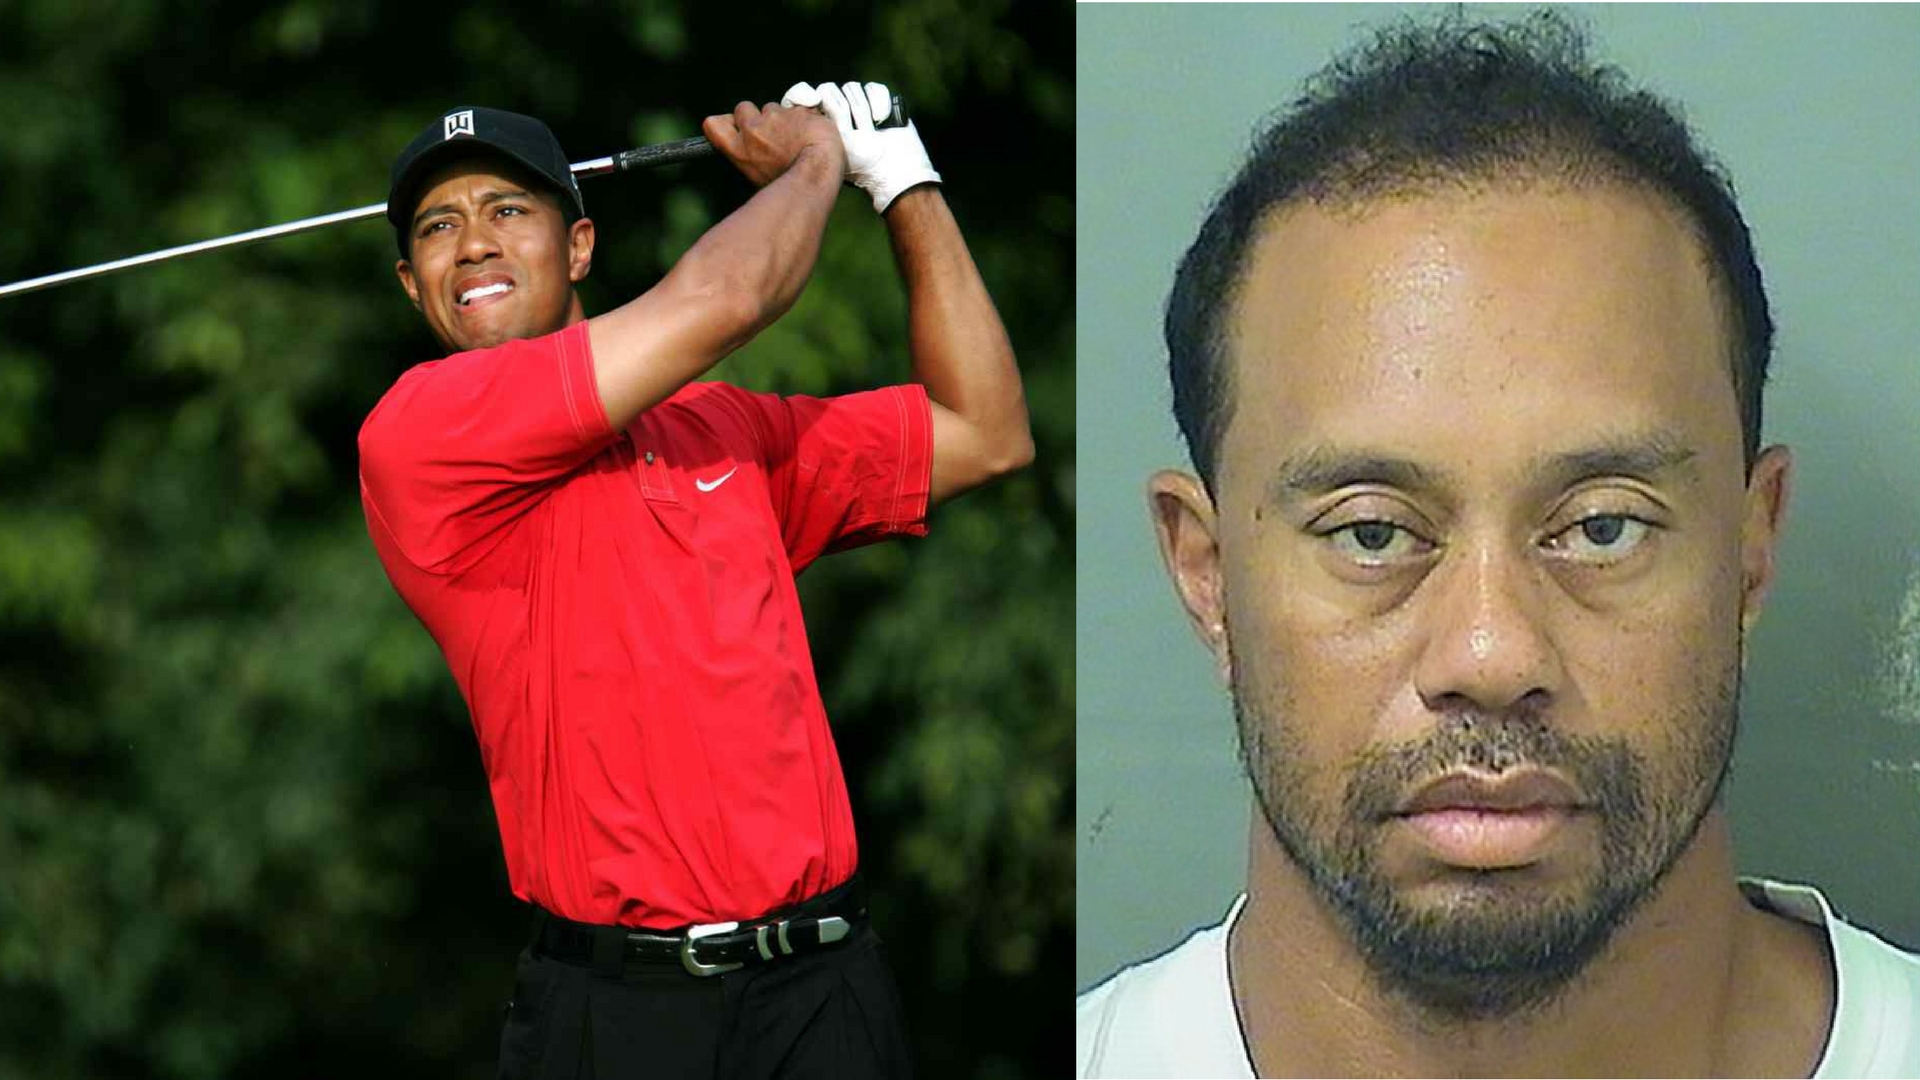 [UPDATE] Tiger Woods DUI was a Result of Prescribed Medication, not Alcohol